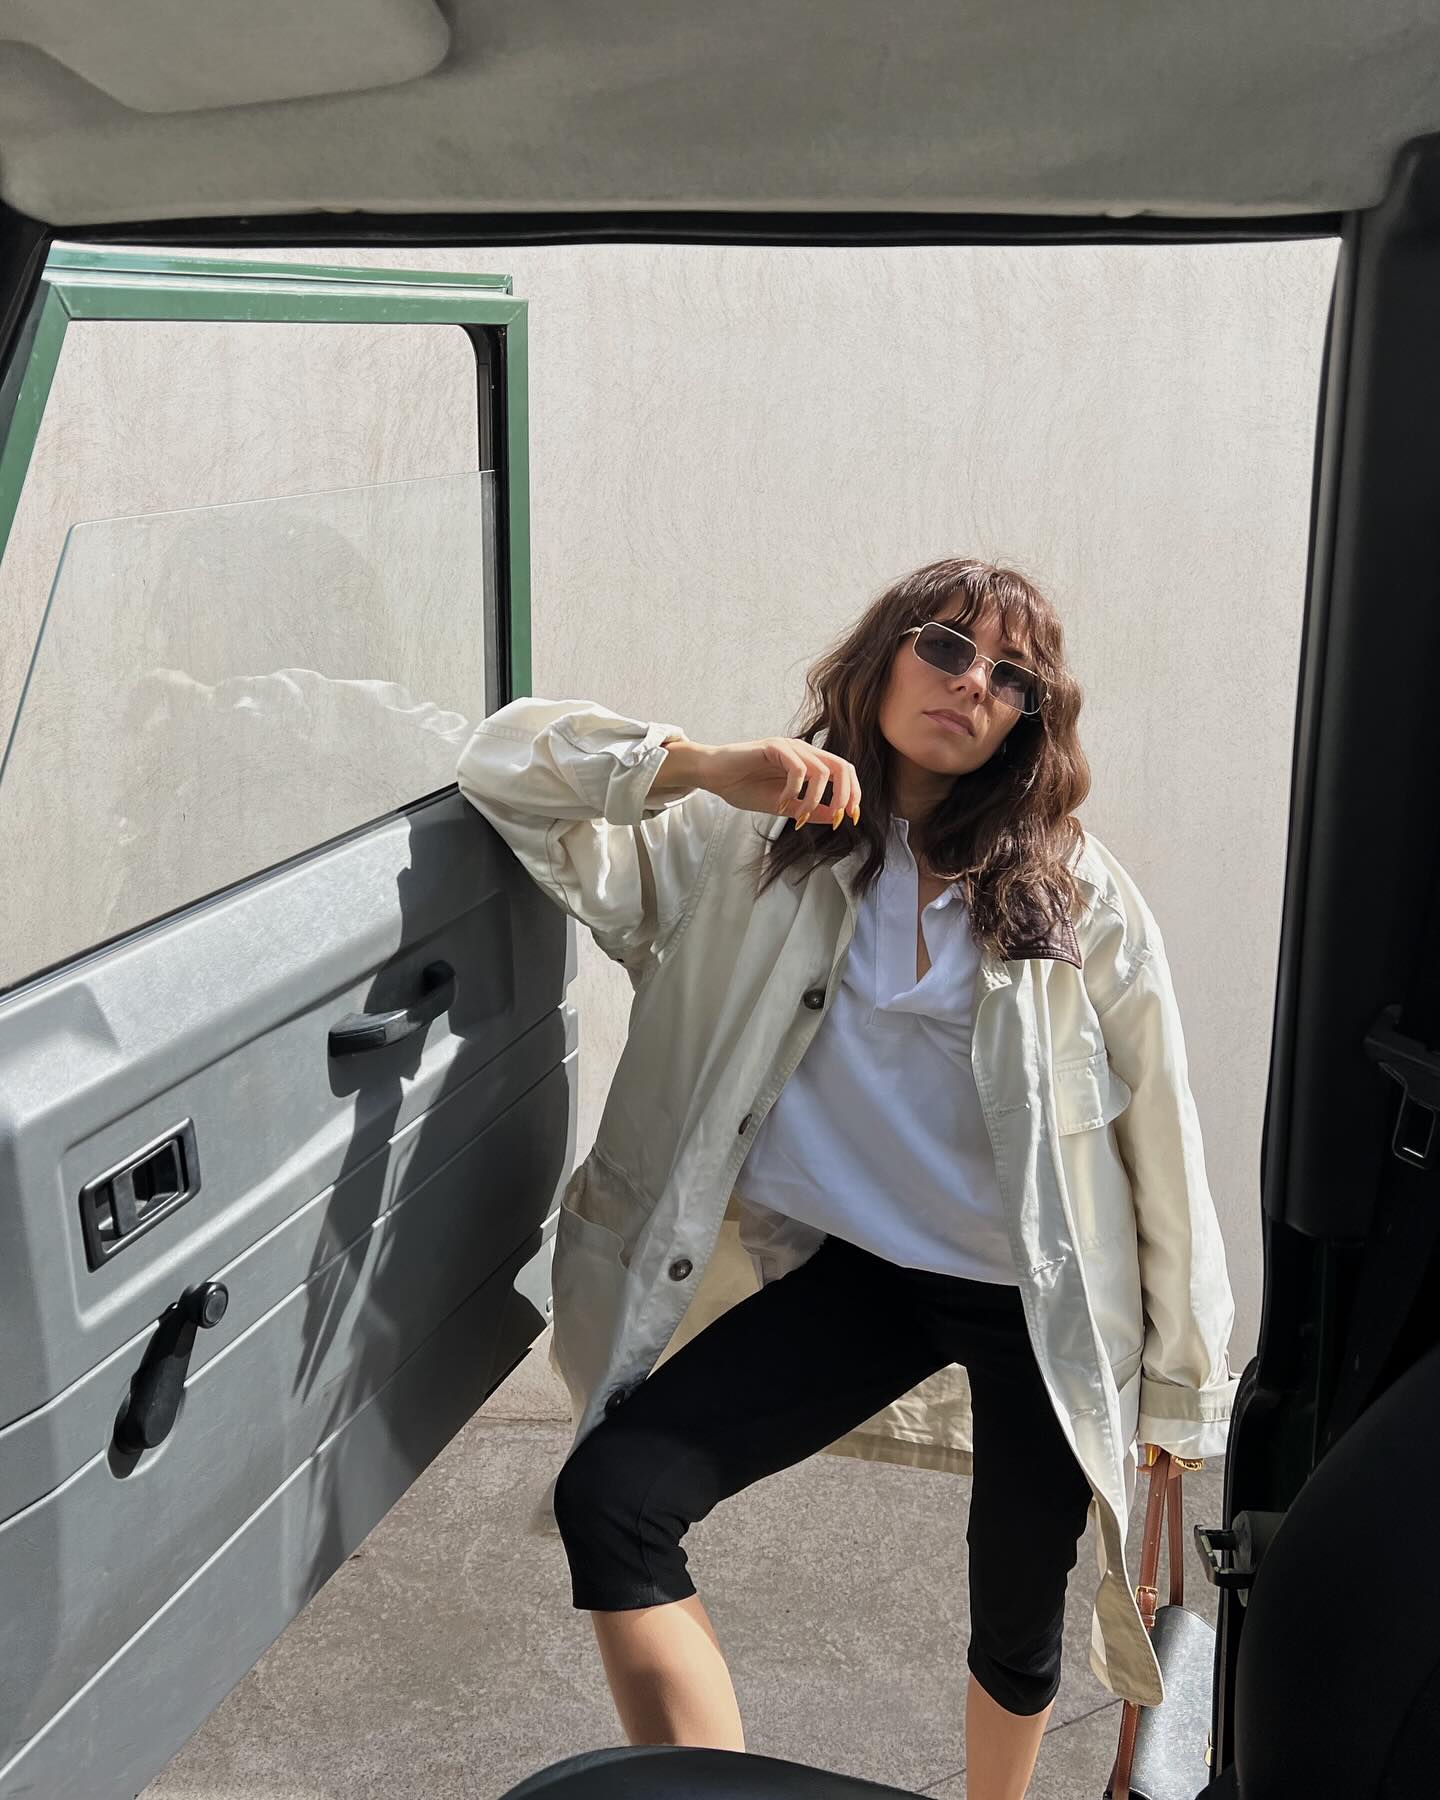 influencer Emilie T. poses in a car door frame with one leg up wearing wire-rim rectangular sunglasses, a barn-style chore coat, white button-neck top, and black capri pants